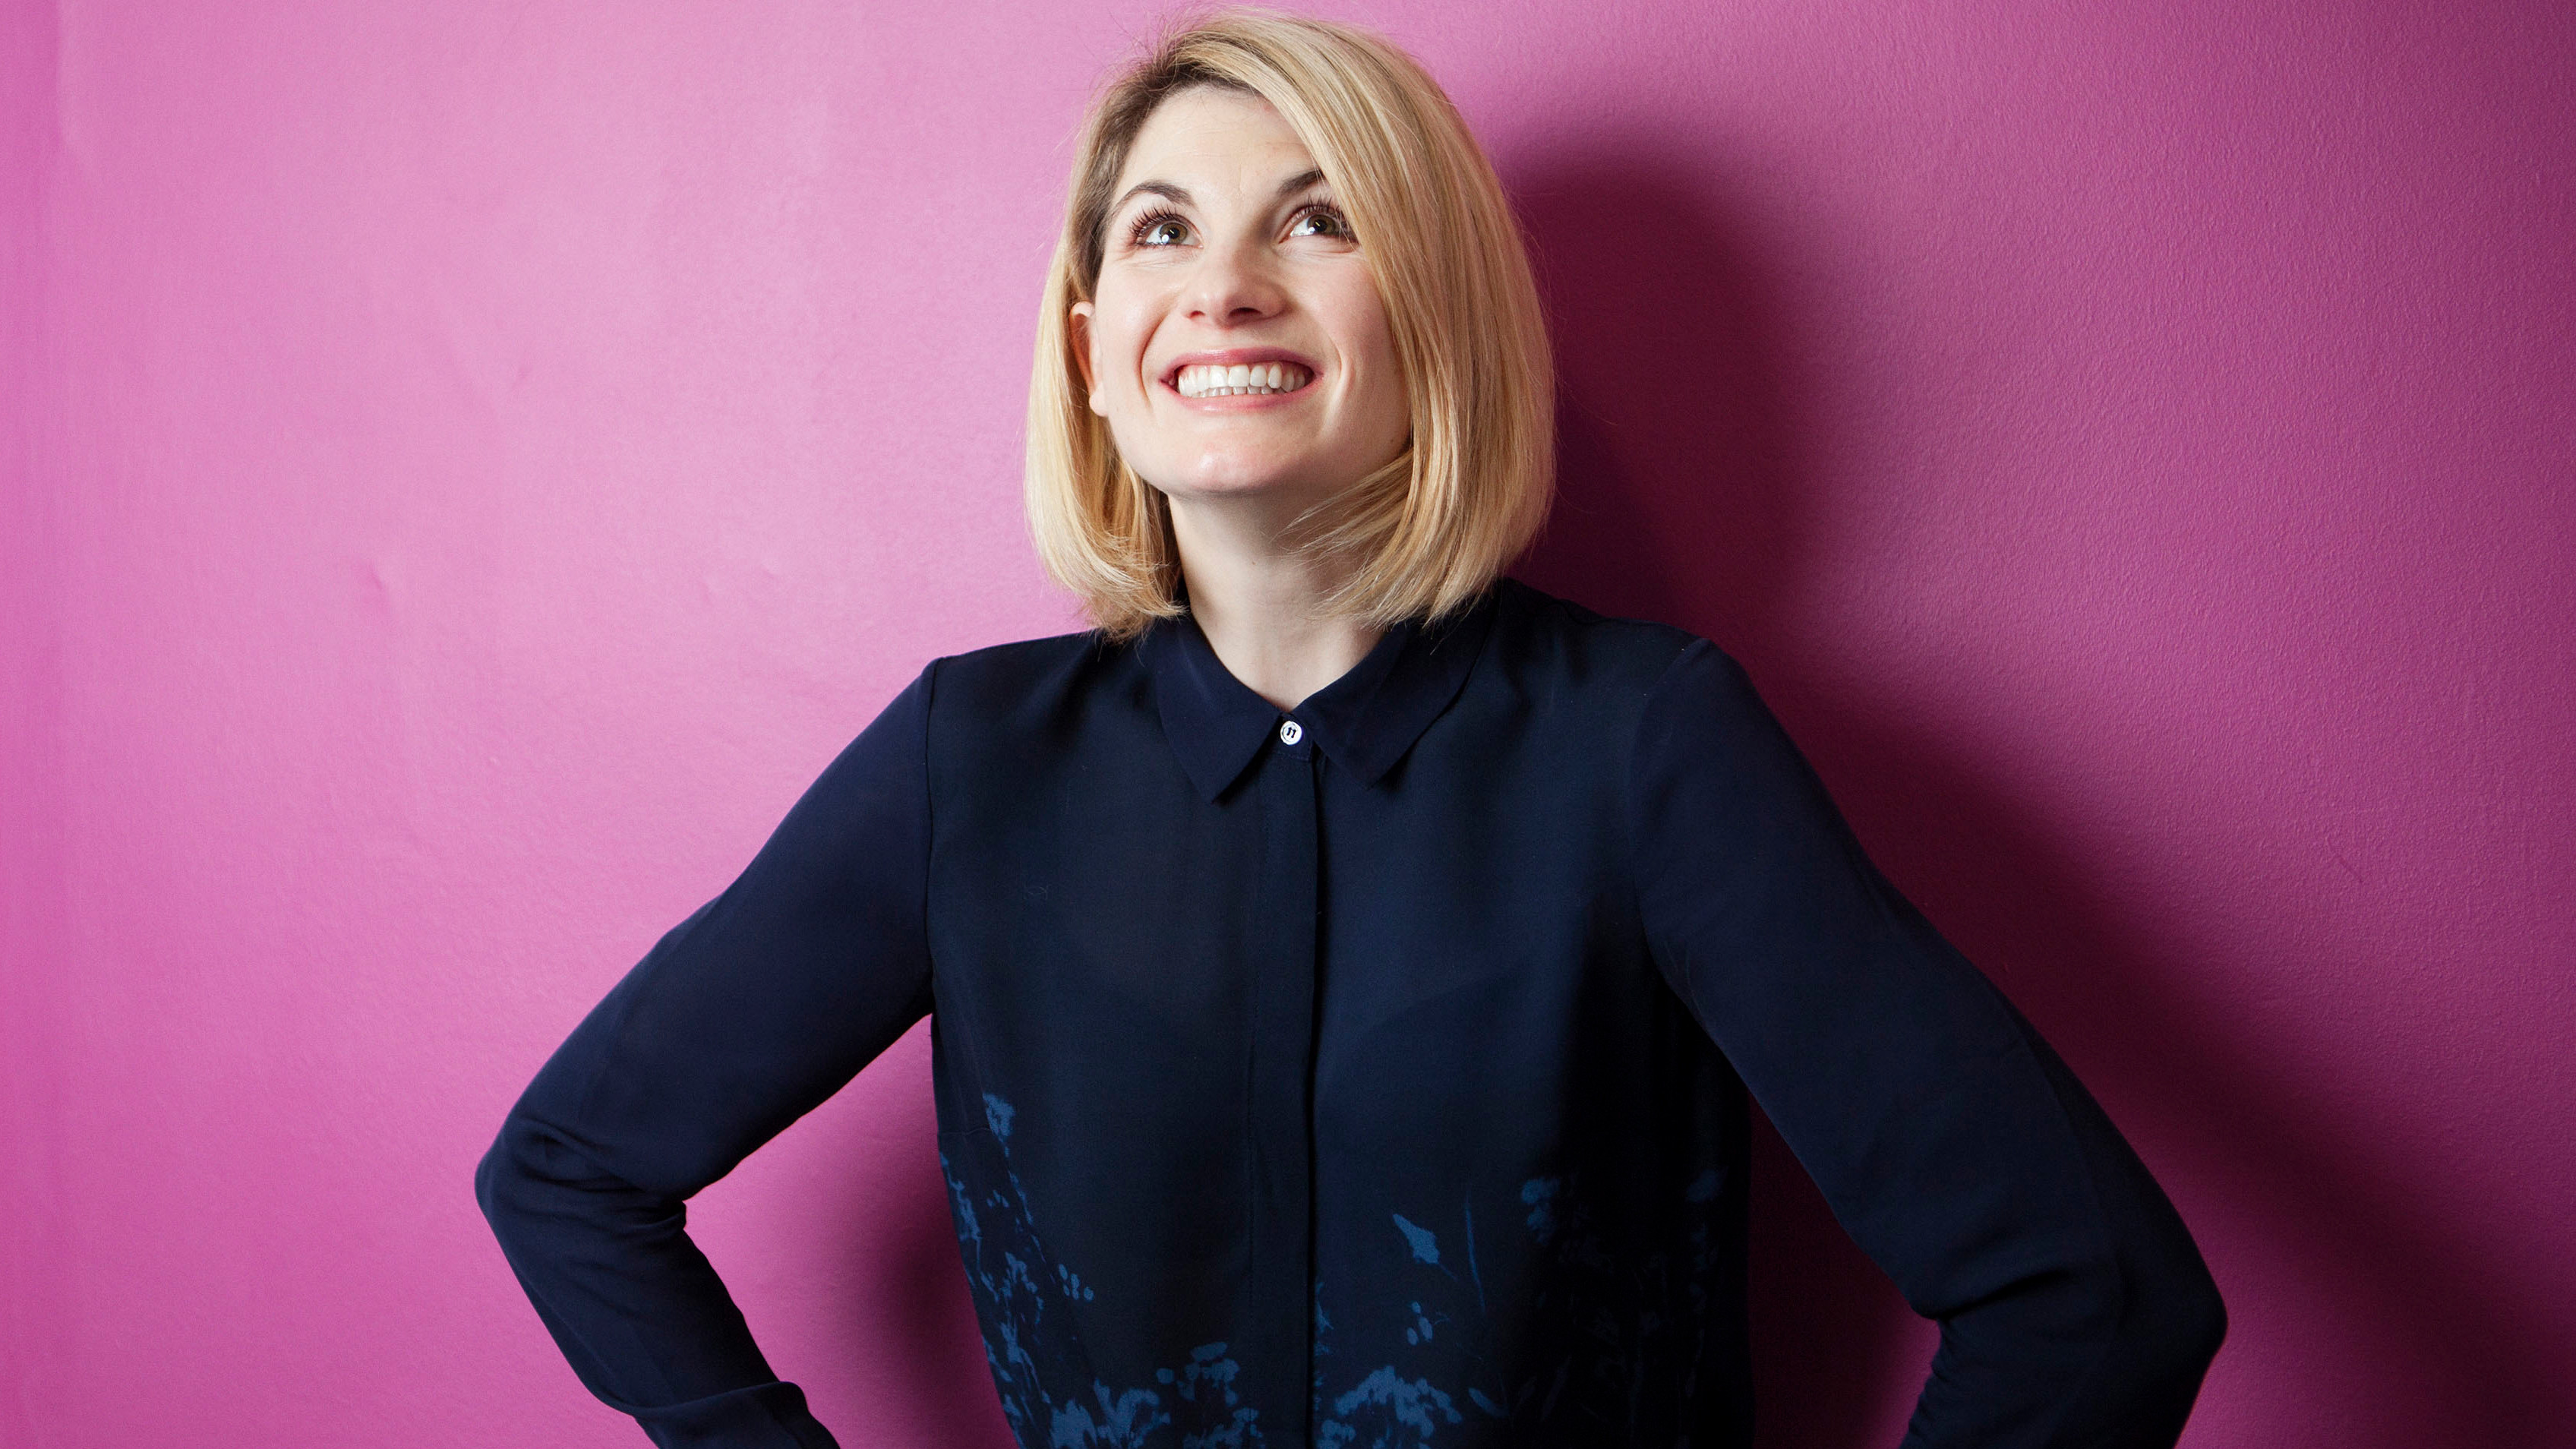 Jodie Whittaker Doctor Who Women The Doctor British 3392x1908